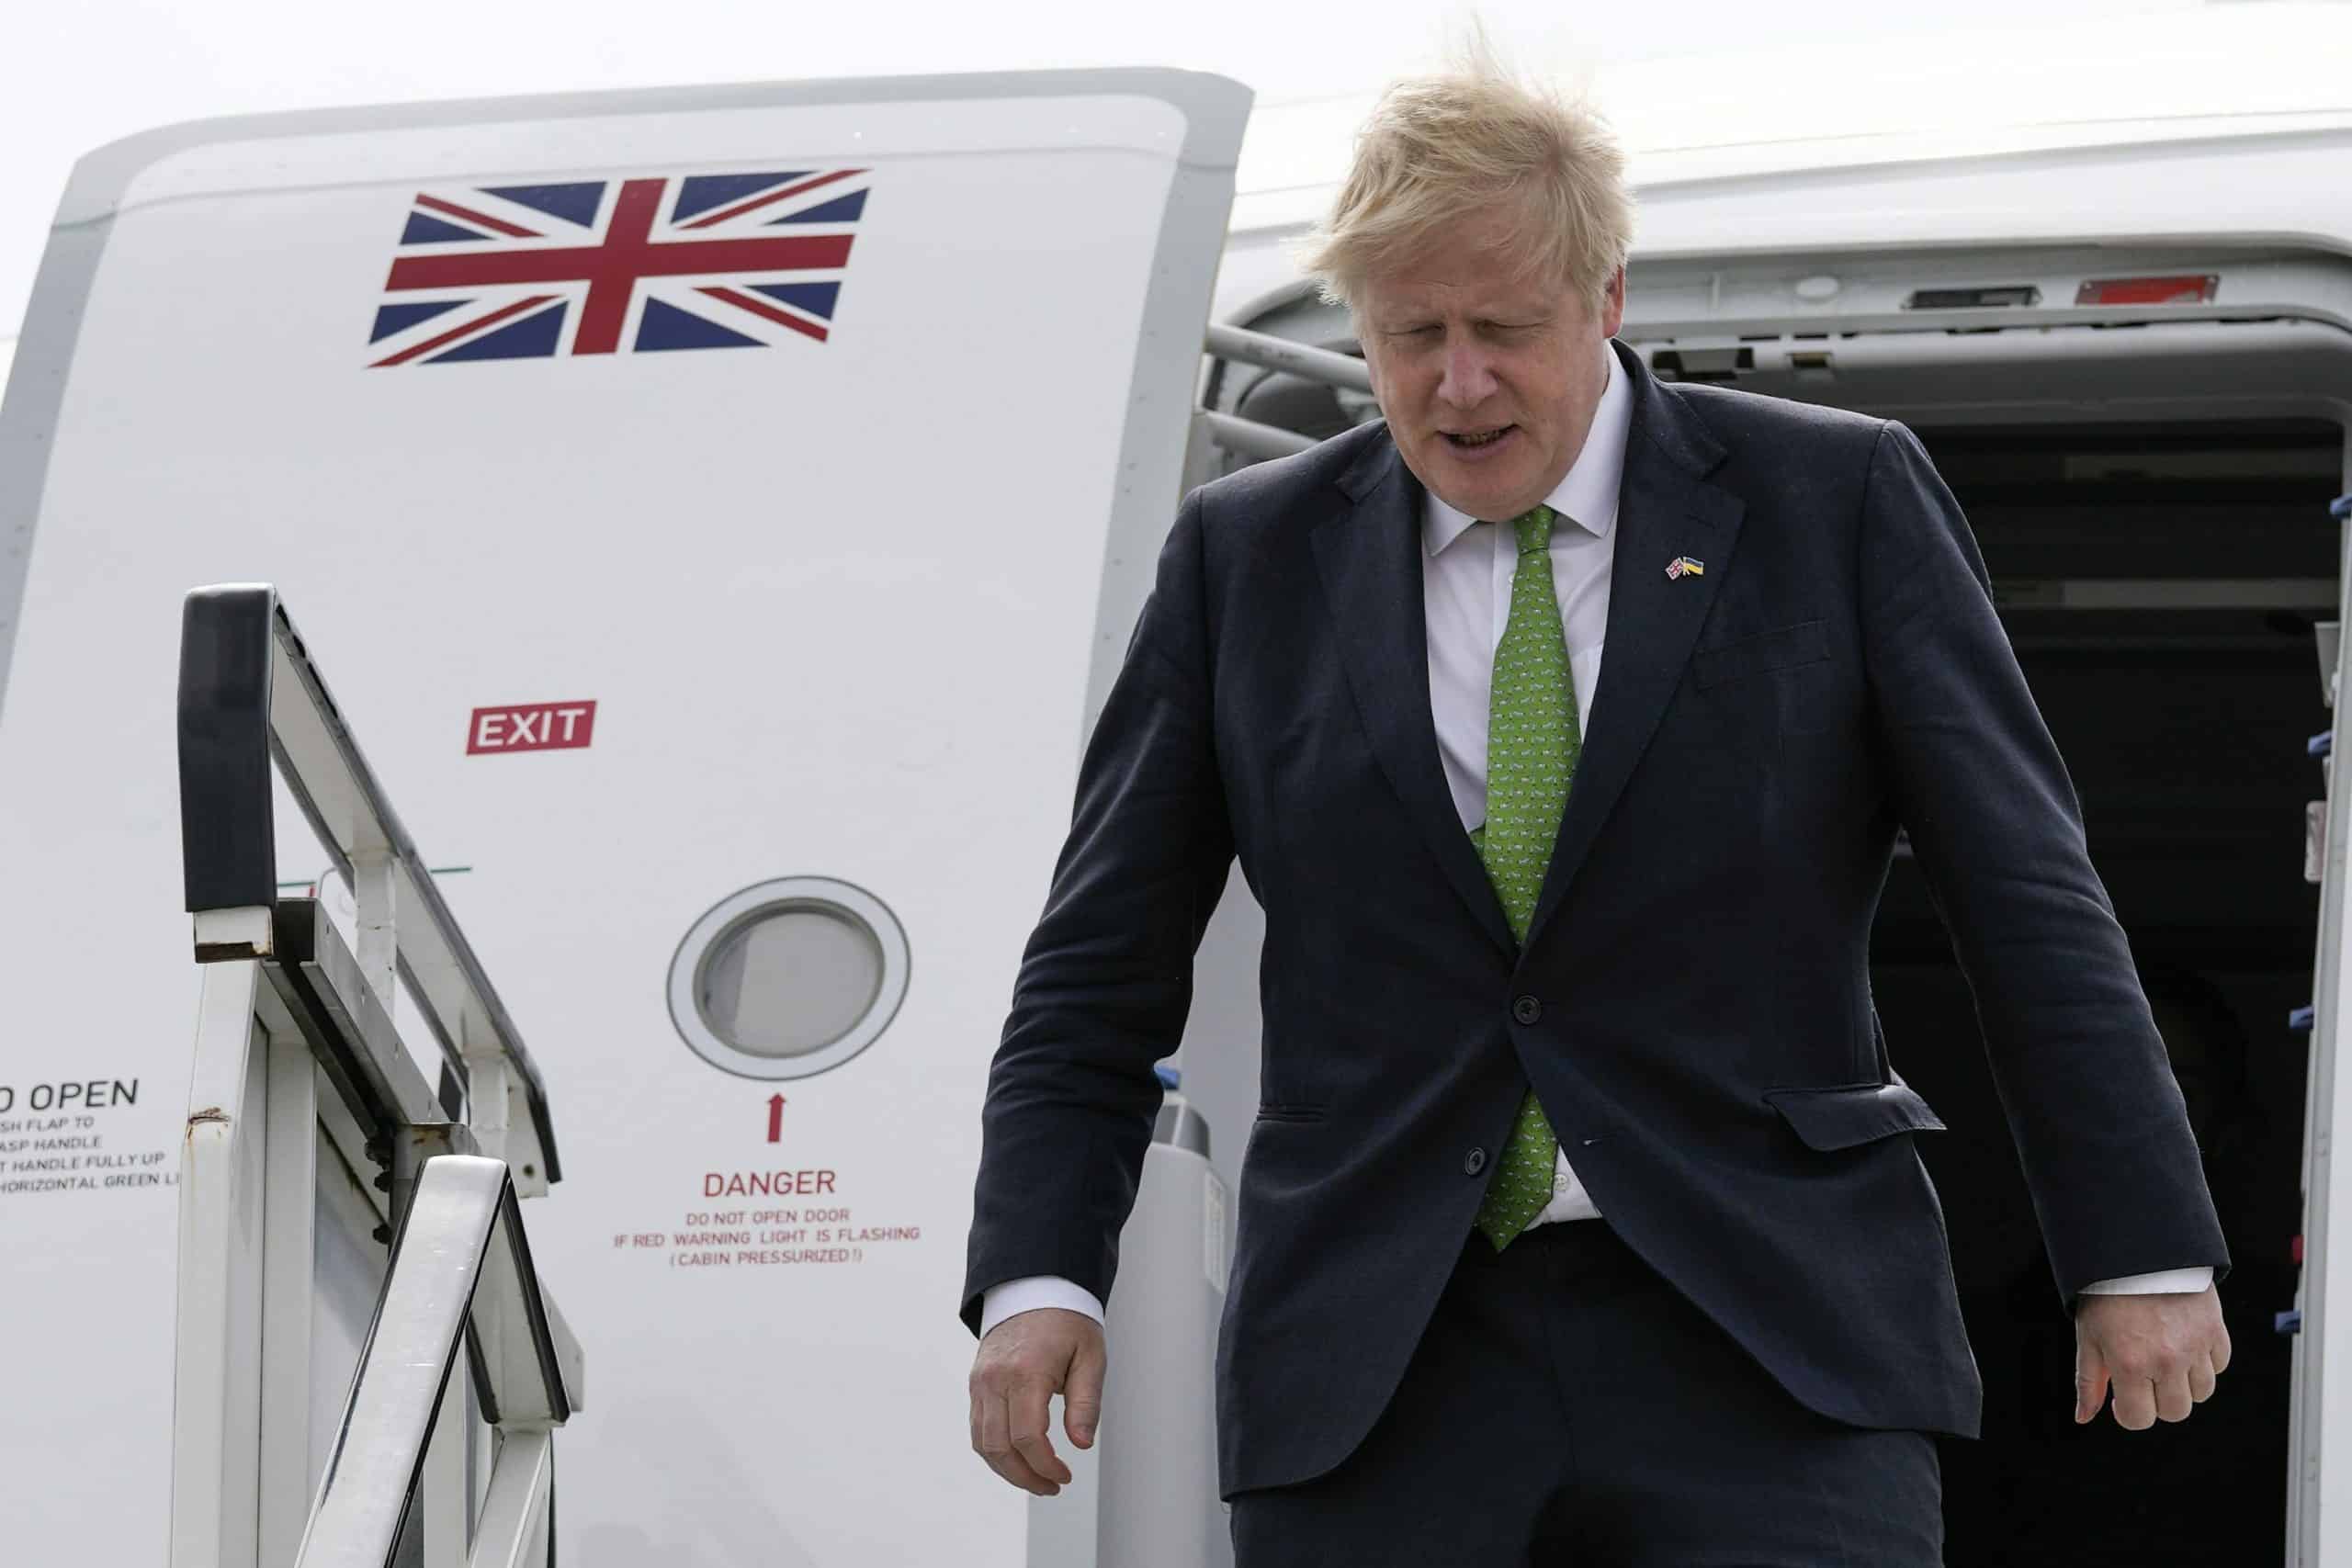 Johnson threatens to renege on post-Brexit deal he negotiated – again